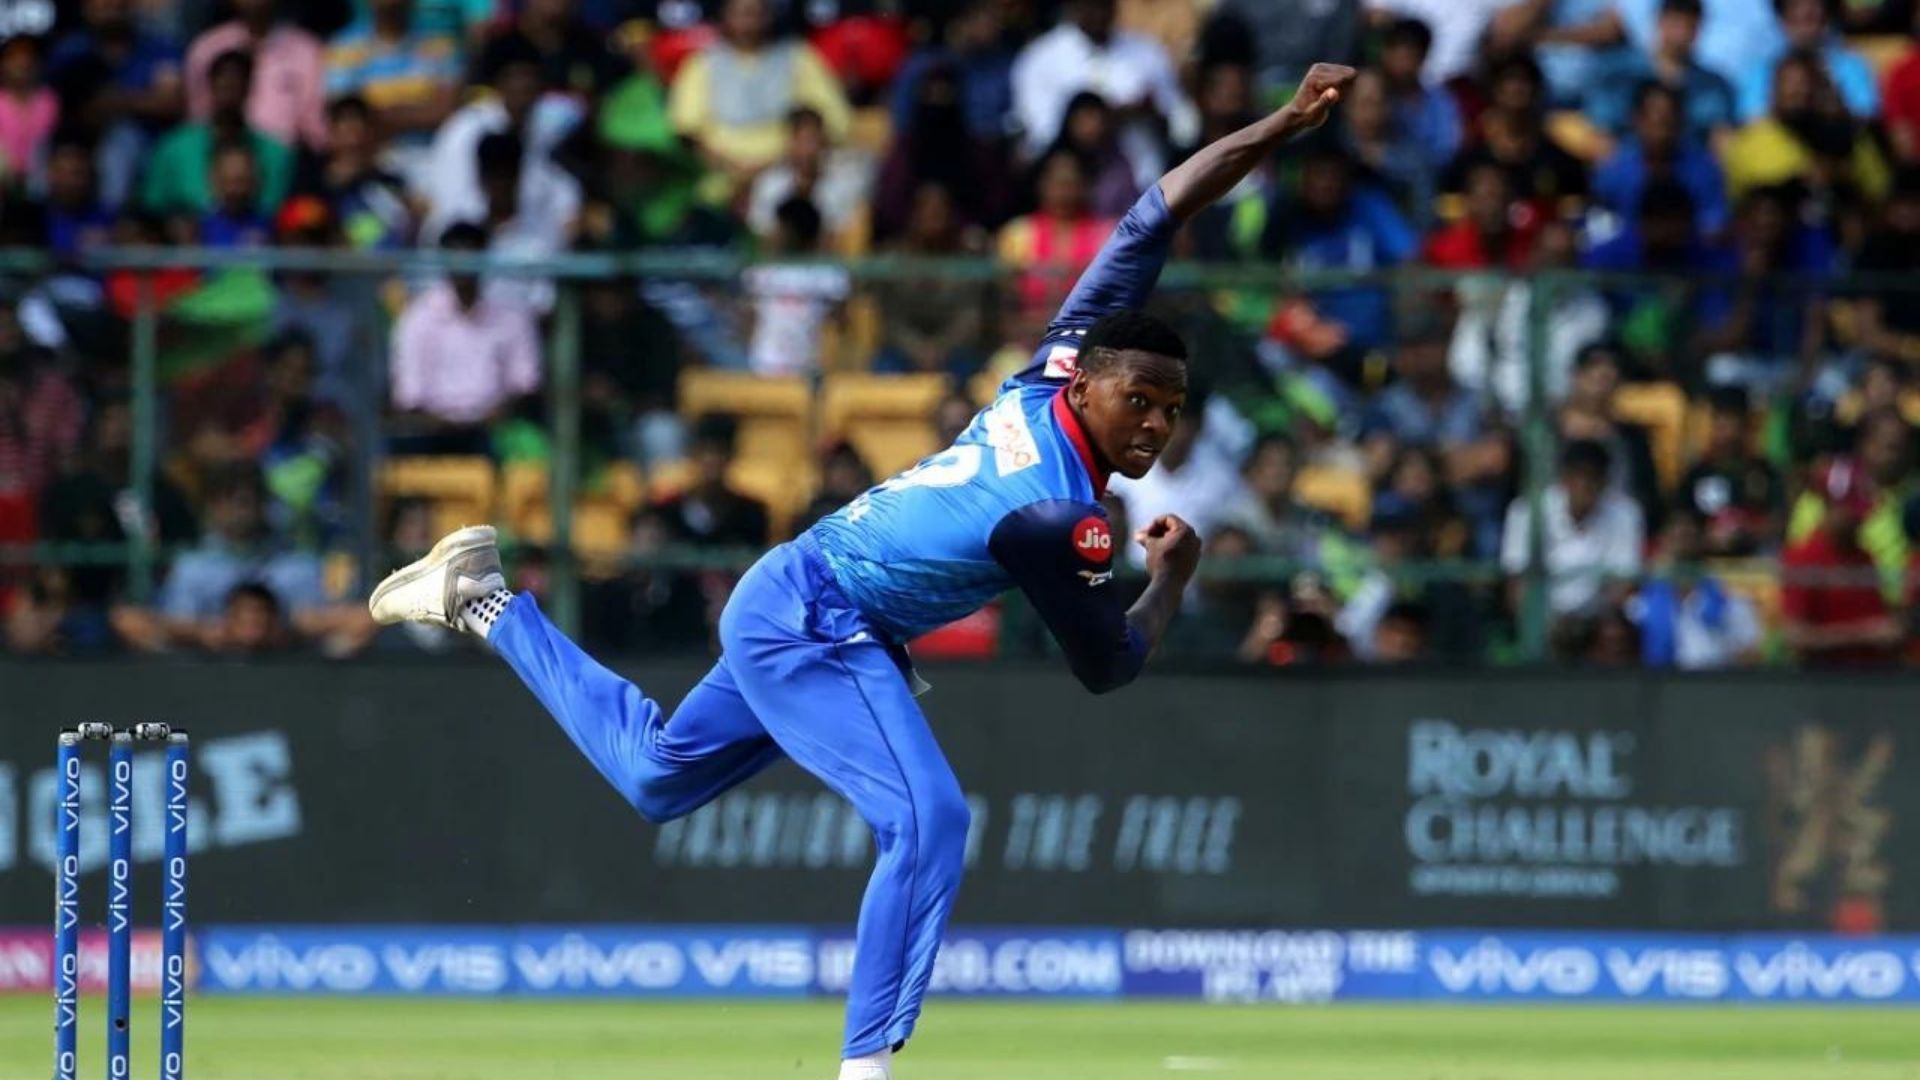 Kagiso Rabada was a terrific performer for DC in the past (Image: BCCI/IPL)